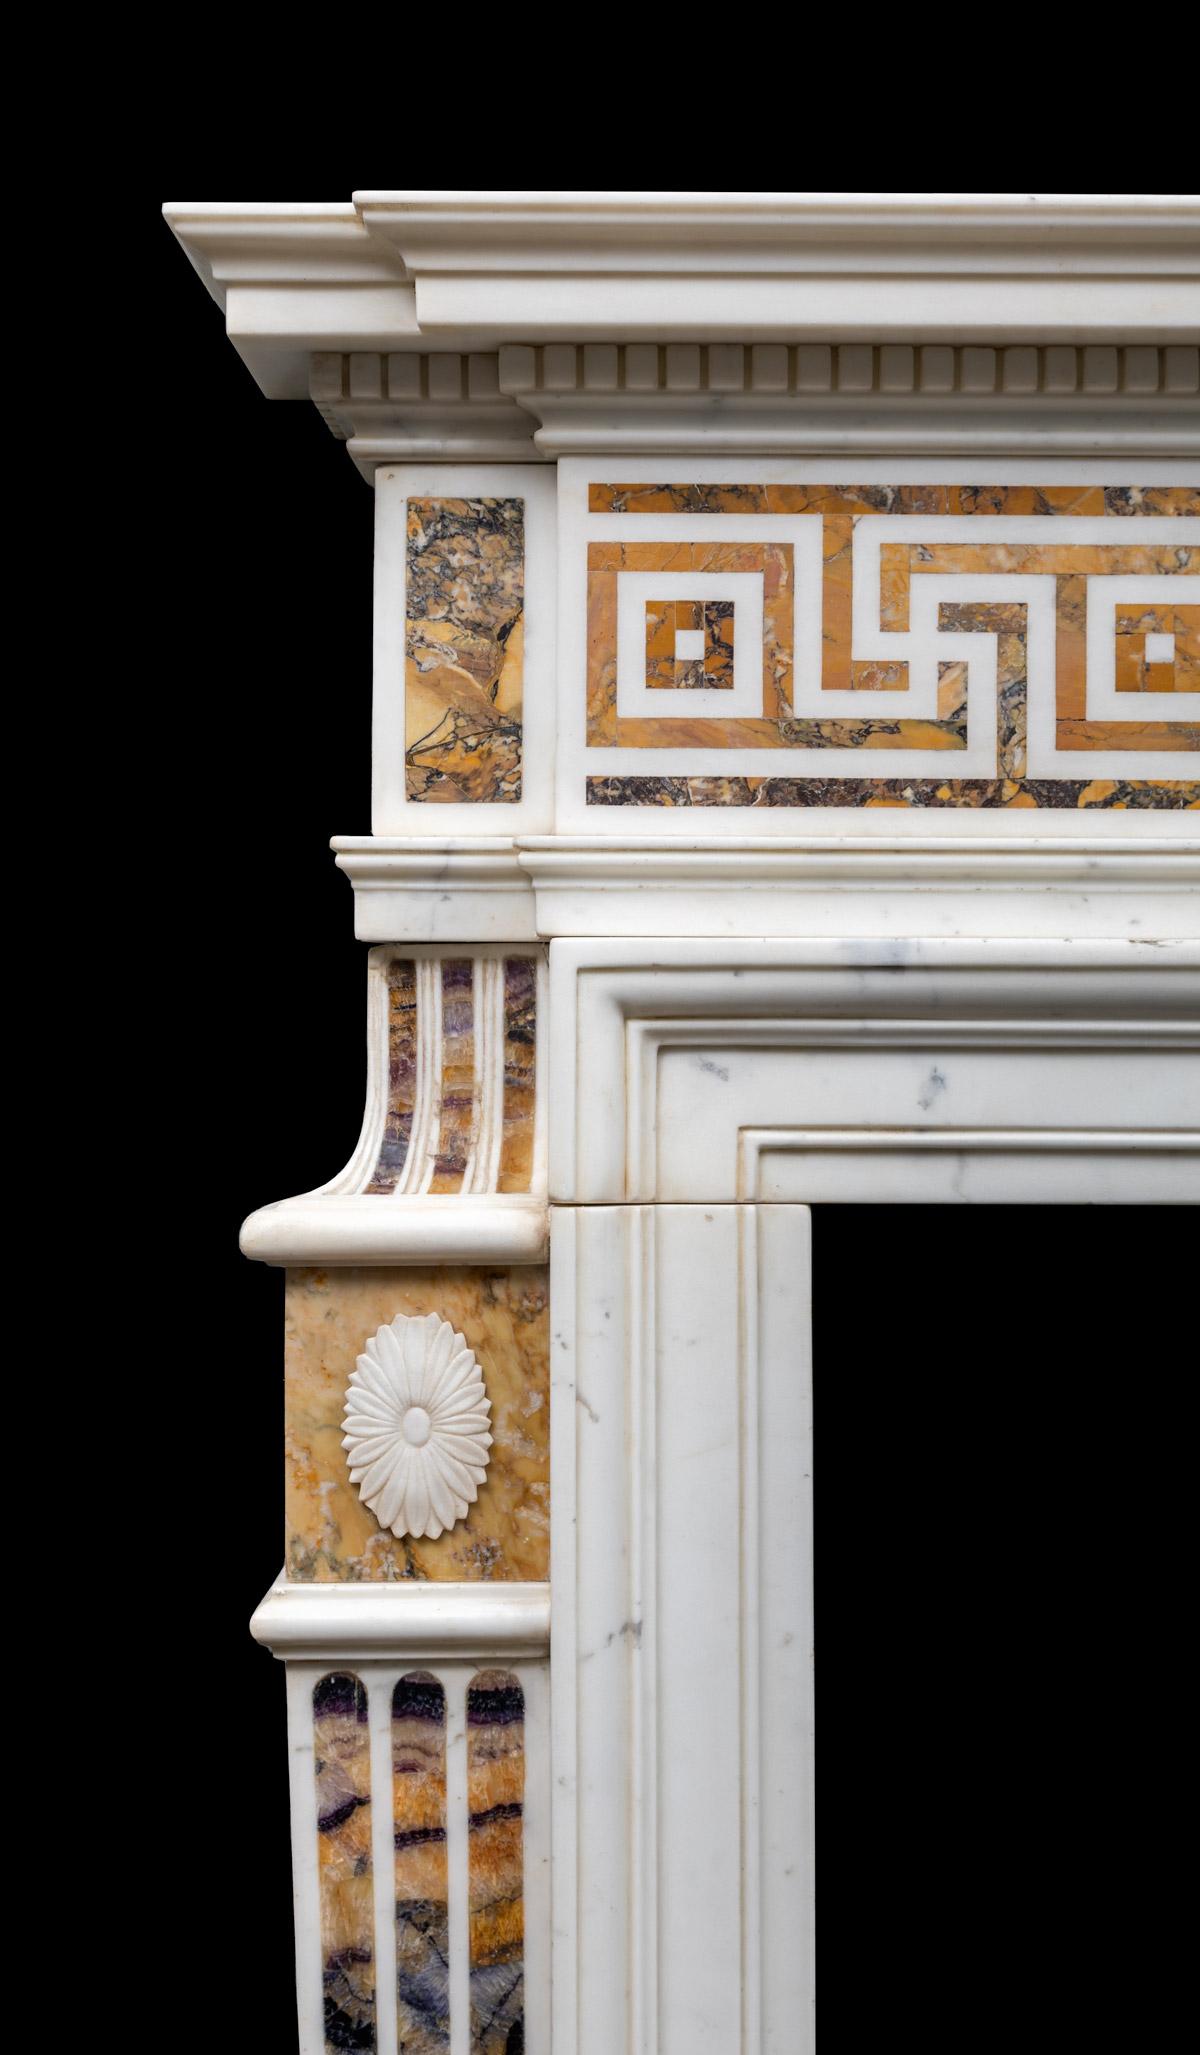 A magnificent antique statuary marble chimneypiece with semi-precious Blue-John and Sienna marble inlays. The statuary marble centre tablet has a large inlaid oval panel of 'Millers vein Blue John'. This is flanked by frieze panels, inlaid with